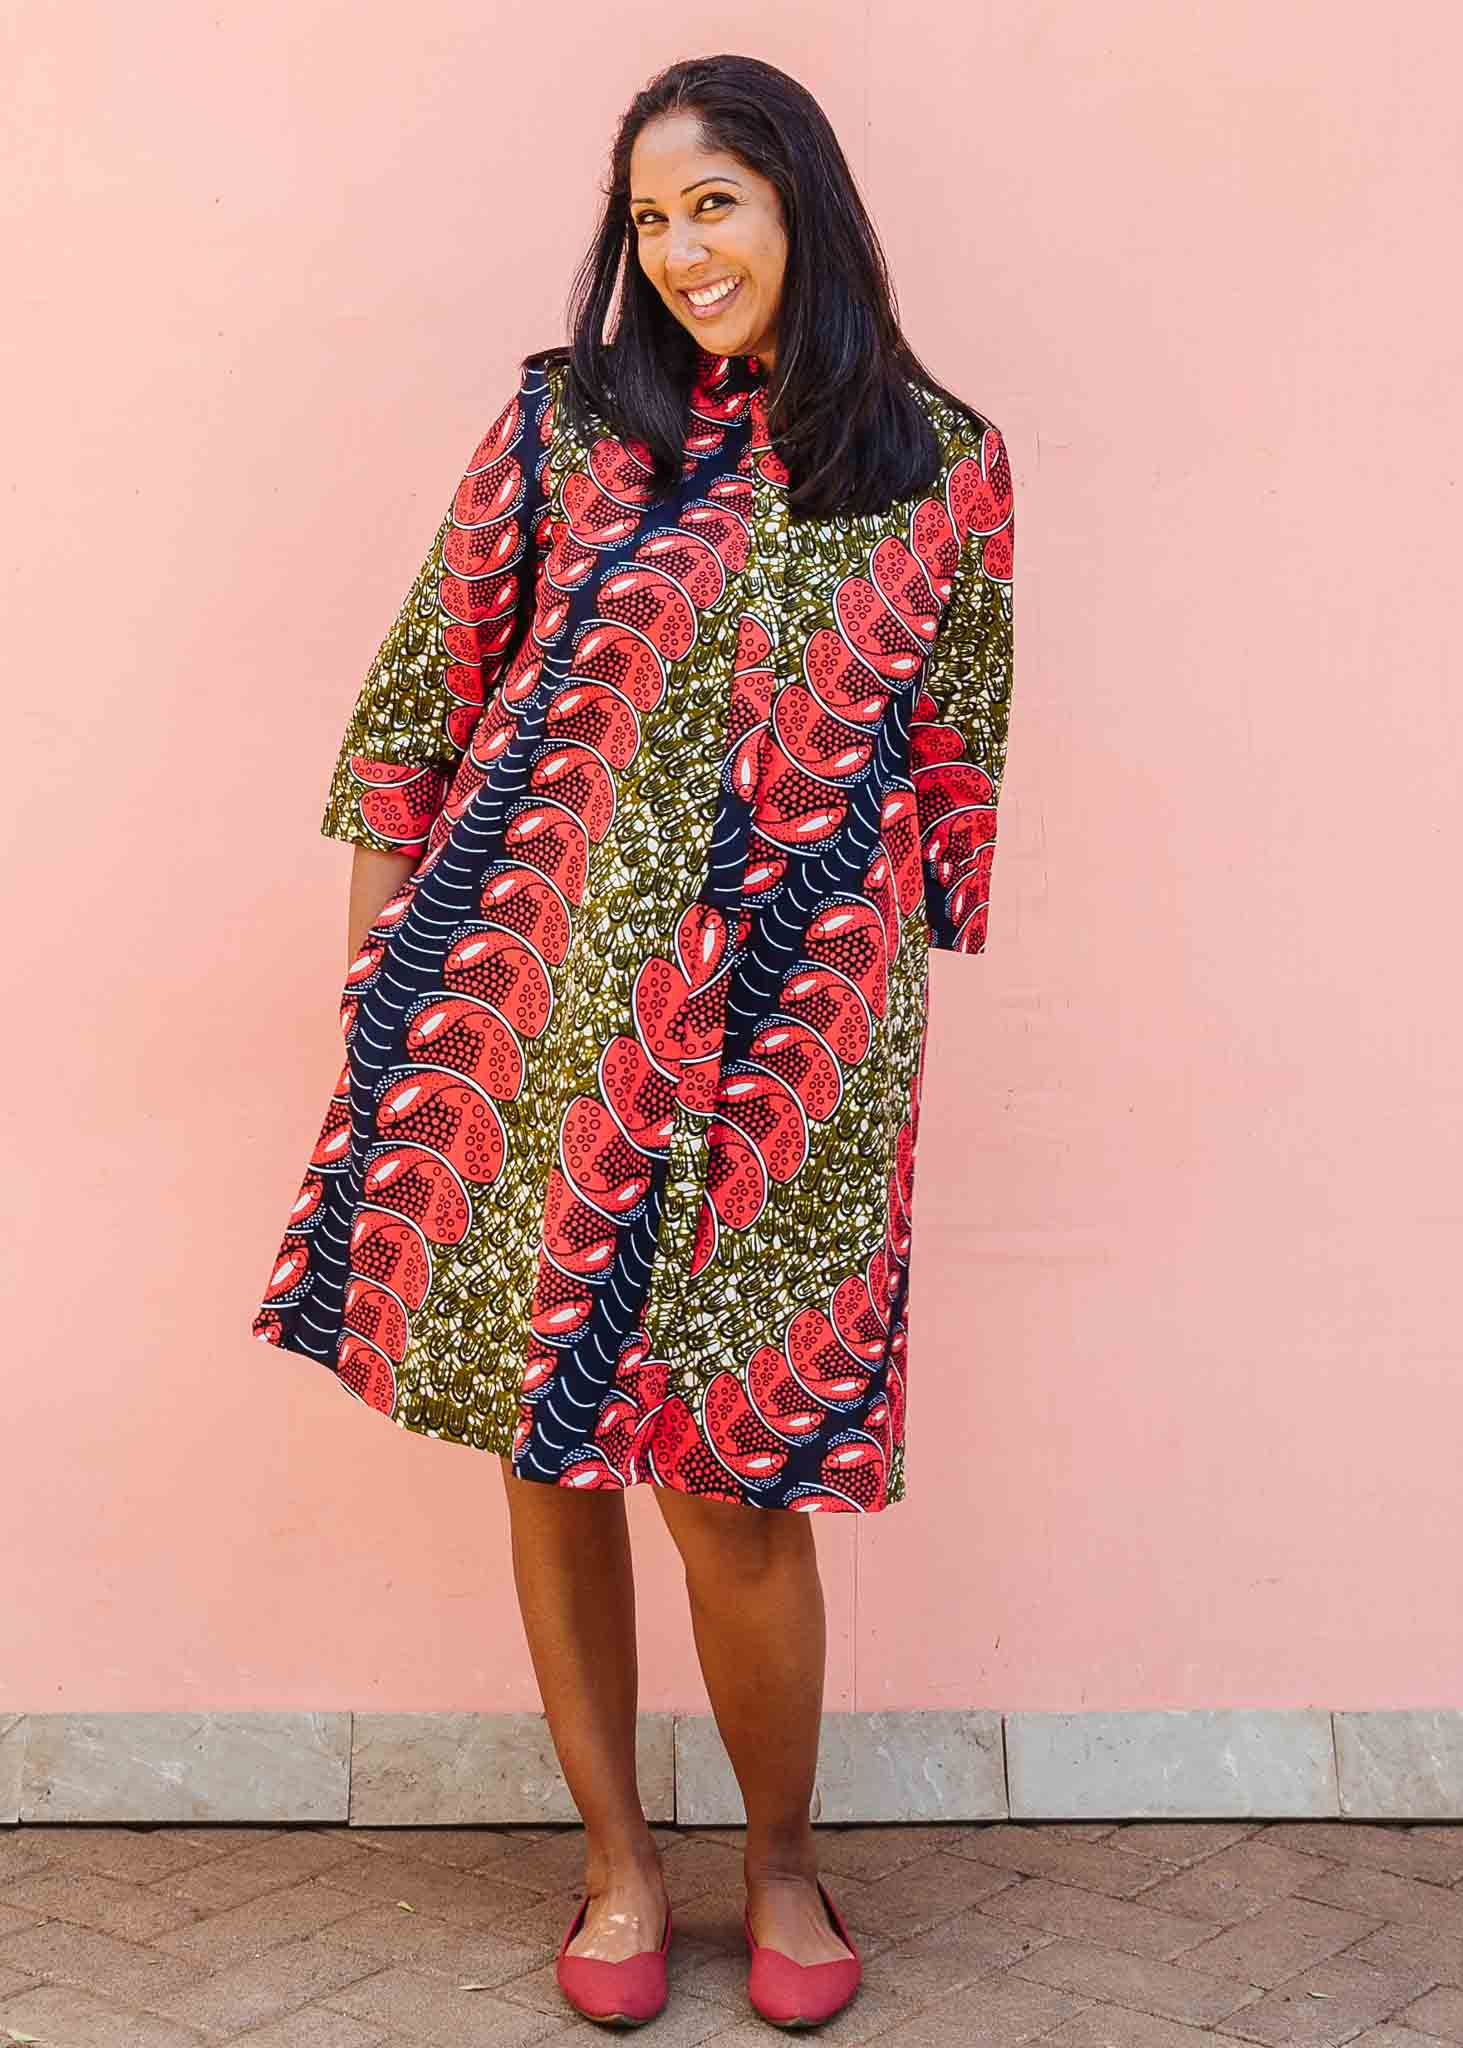 Model wearing green dress, with bold red and navy fish print.